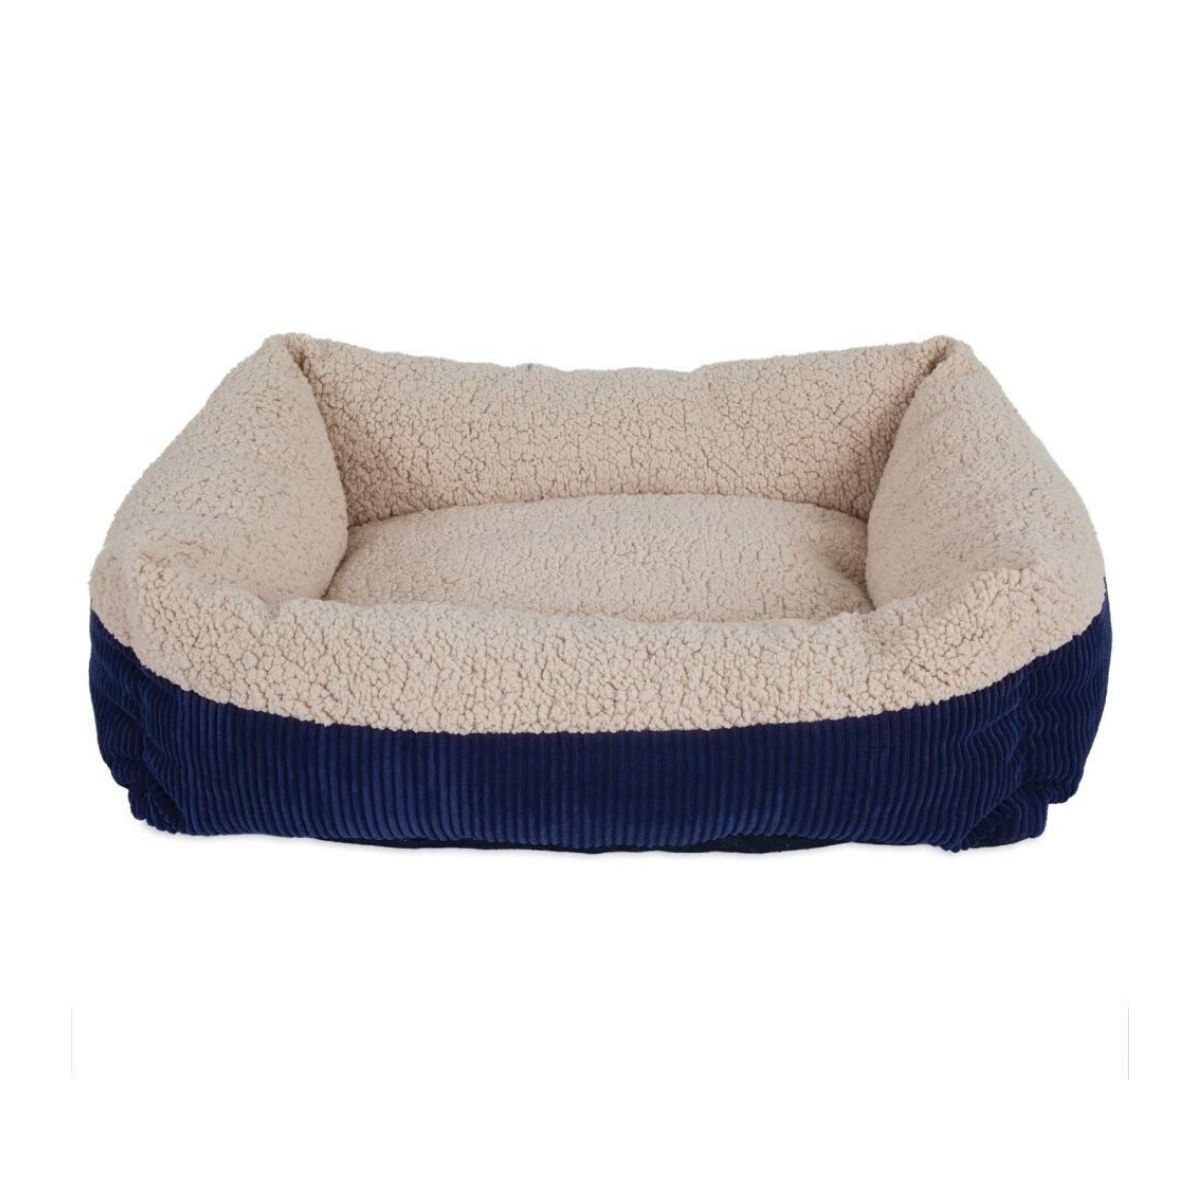 inexpensive dog beds